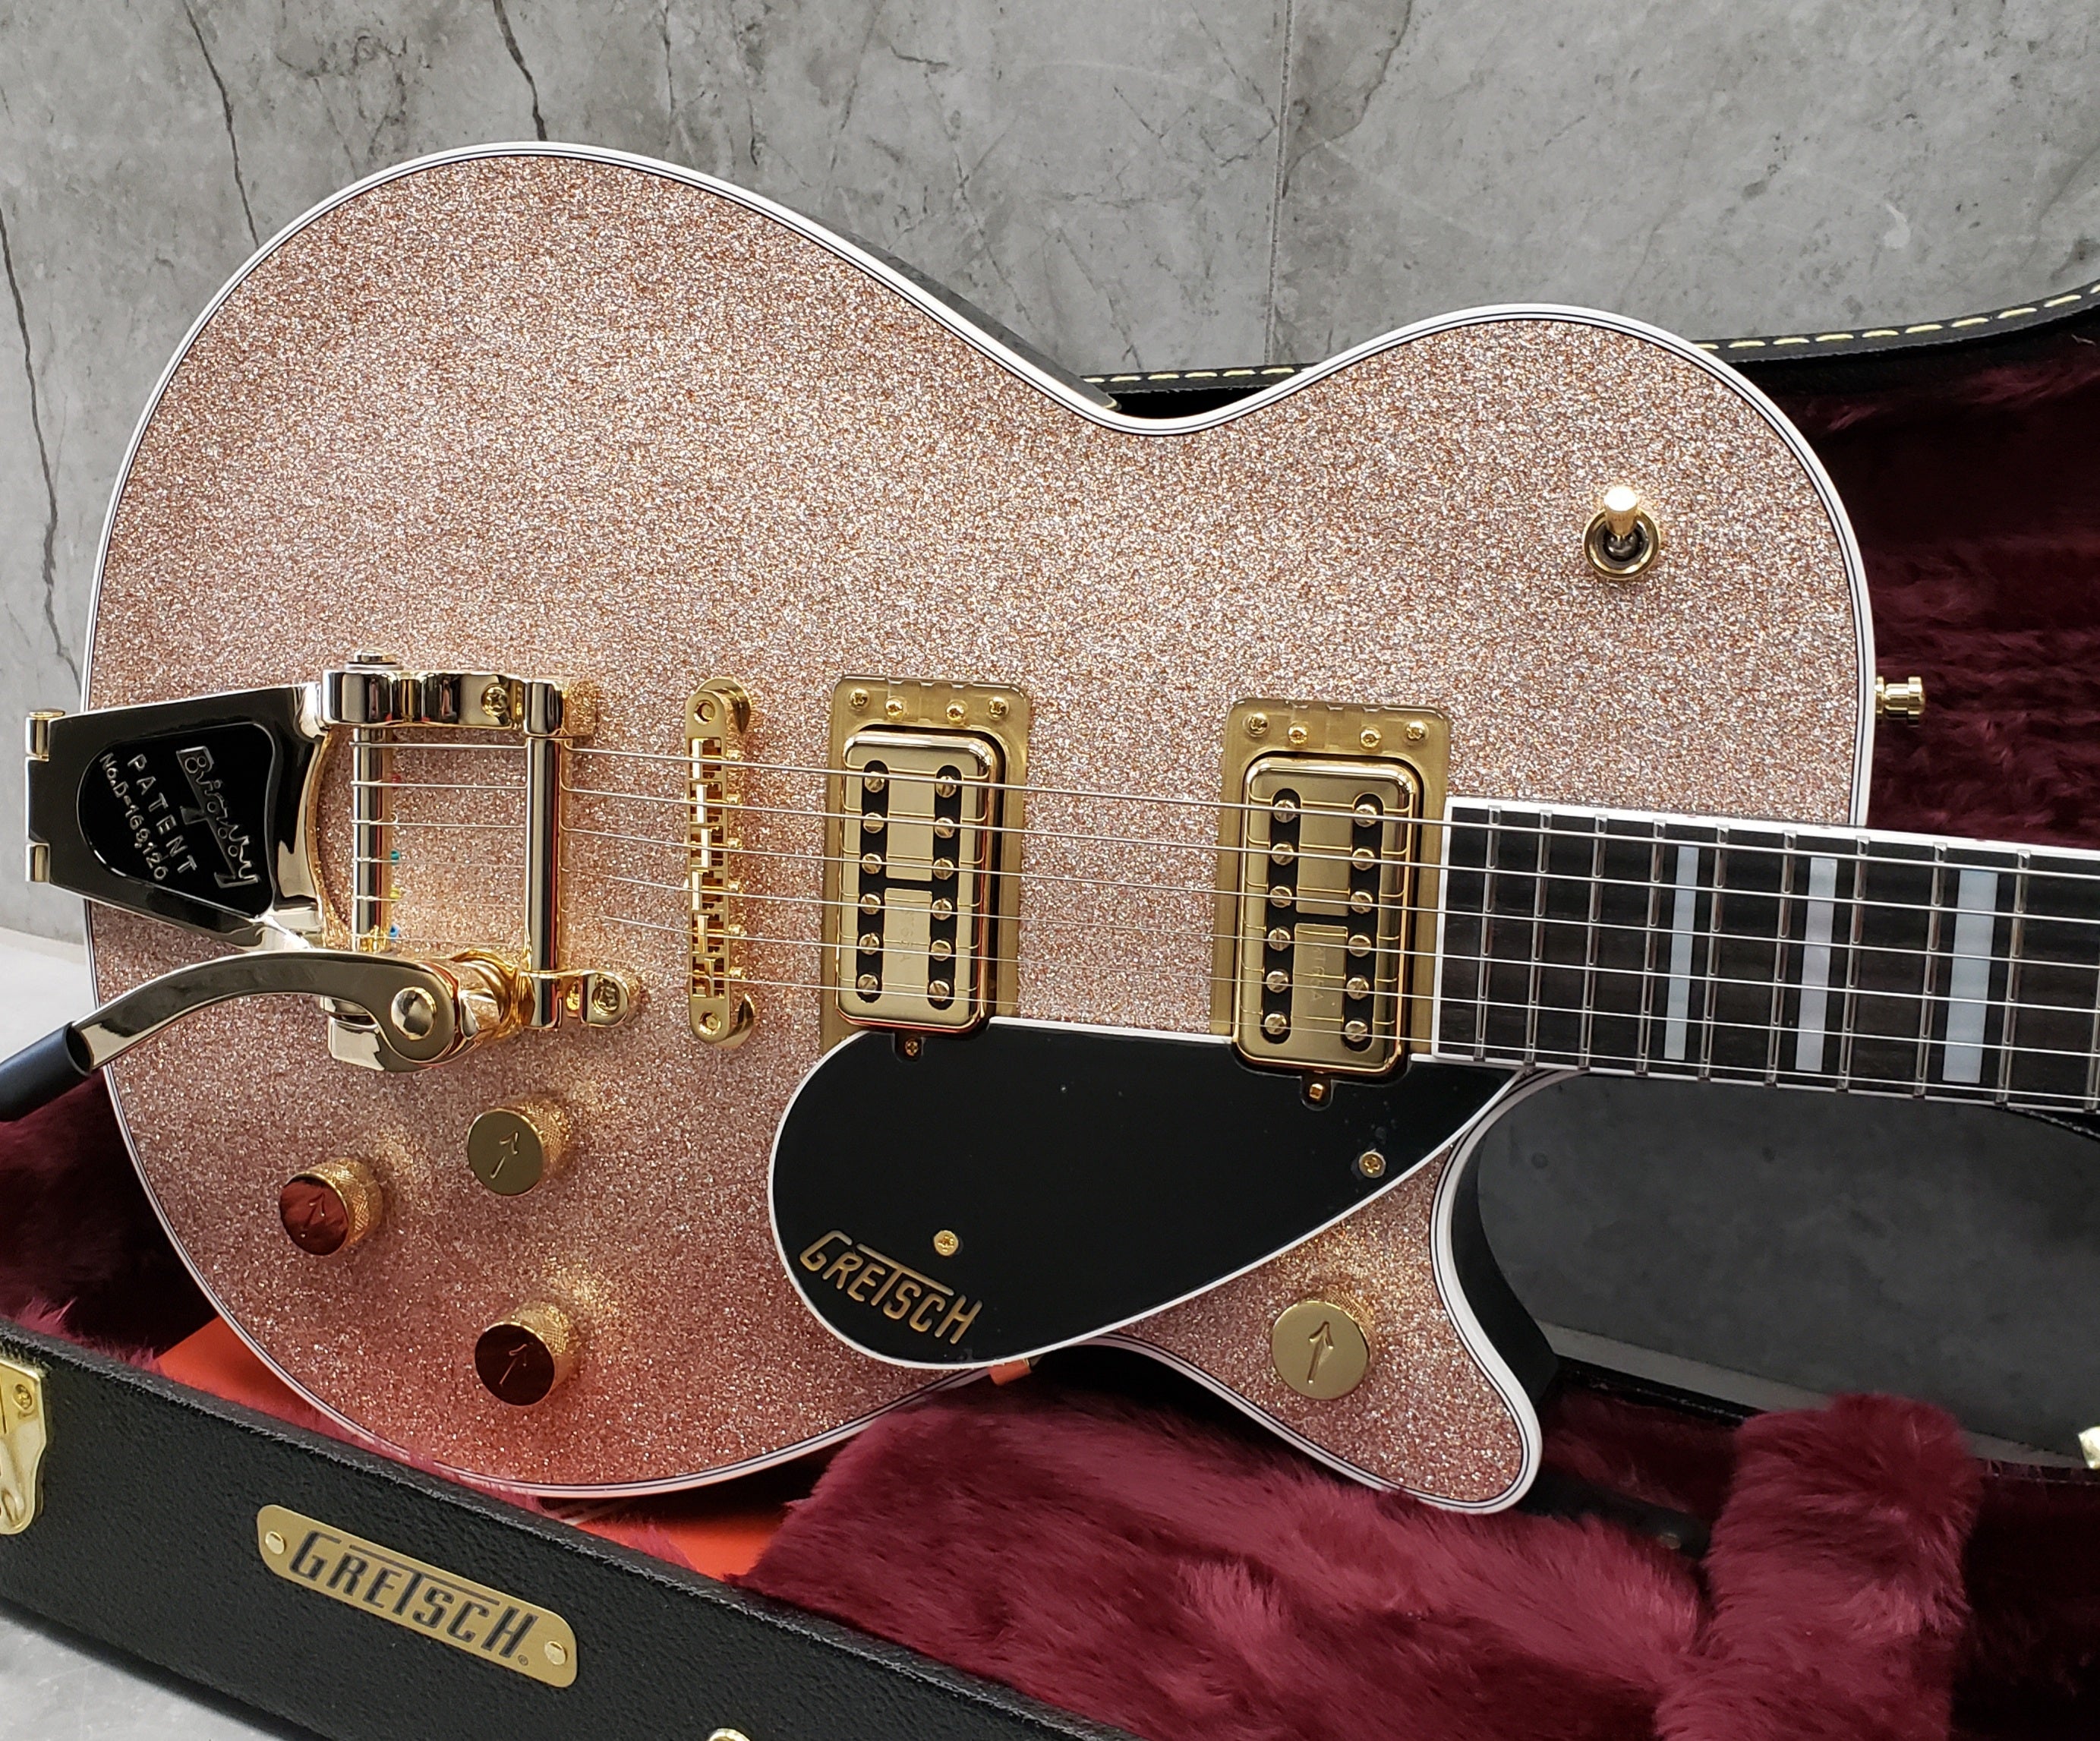 Gretsch G6229TG Limited Edition Players Edition Sparkle Jet BT with Bigsby and Gold Hardware, Ebony Fingerboard Champagne Sparkle 2403410816